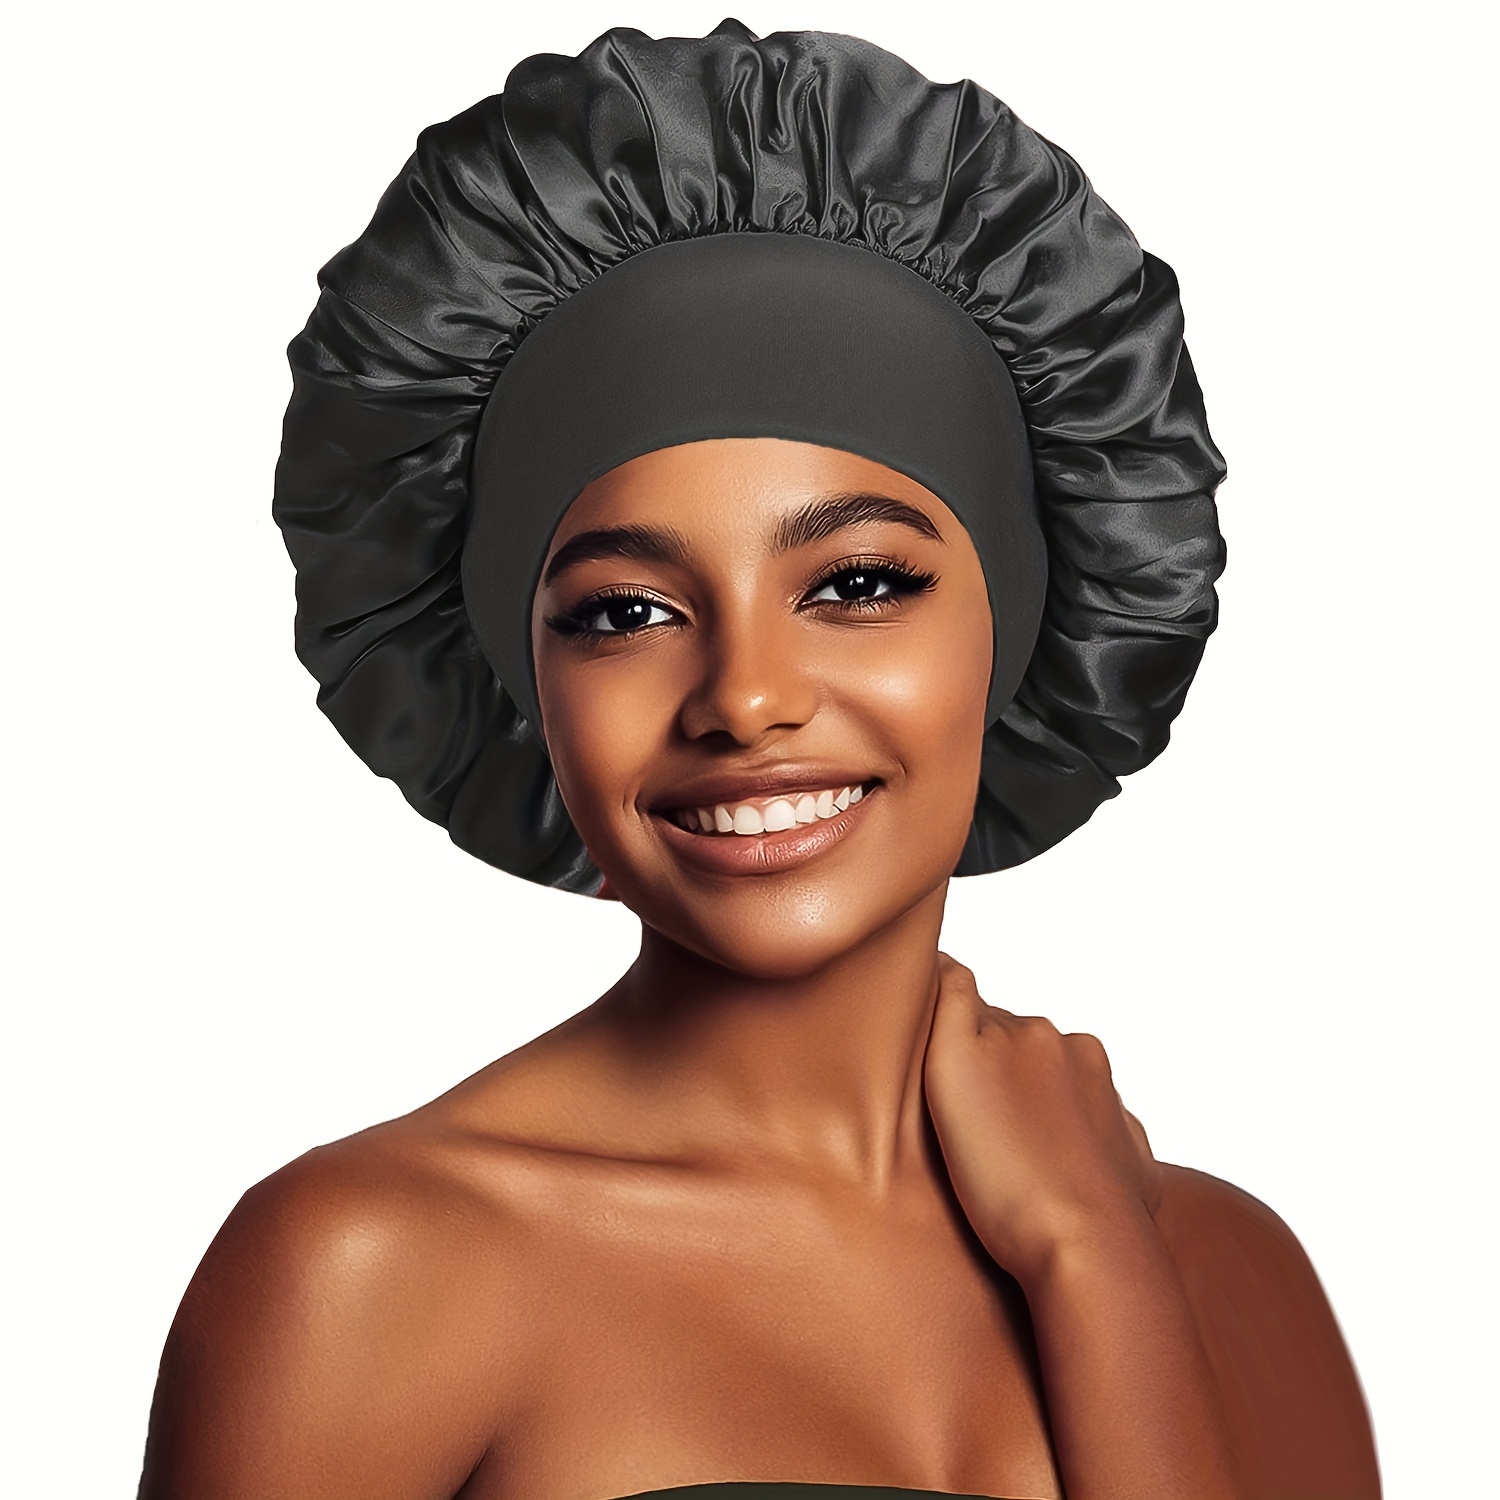 1pc Net Plopping For Drying Curly Hair, Soulta Net Plopping For Drying  Curly Hair With Drawstring, Adjustable Net Plopping For Drying Curly Hair,  Curly Hair Bonnet, Net Plopping - Beauty & Health 